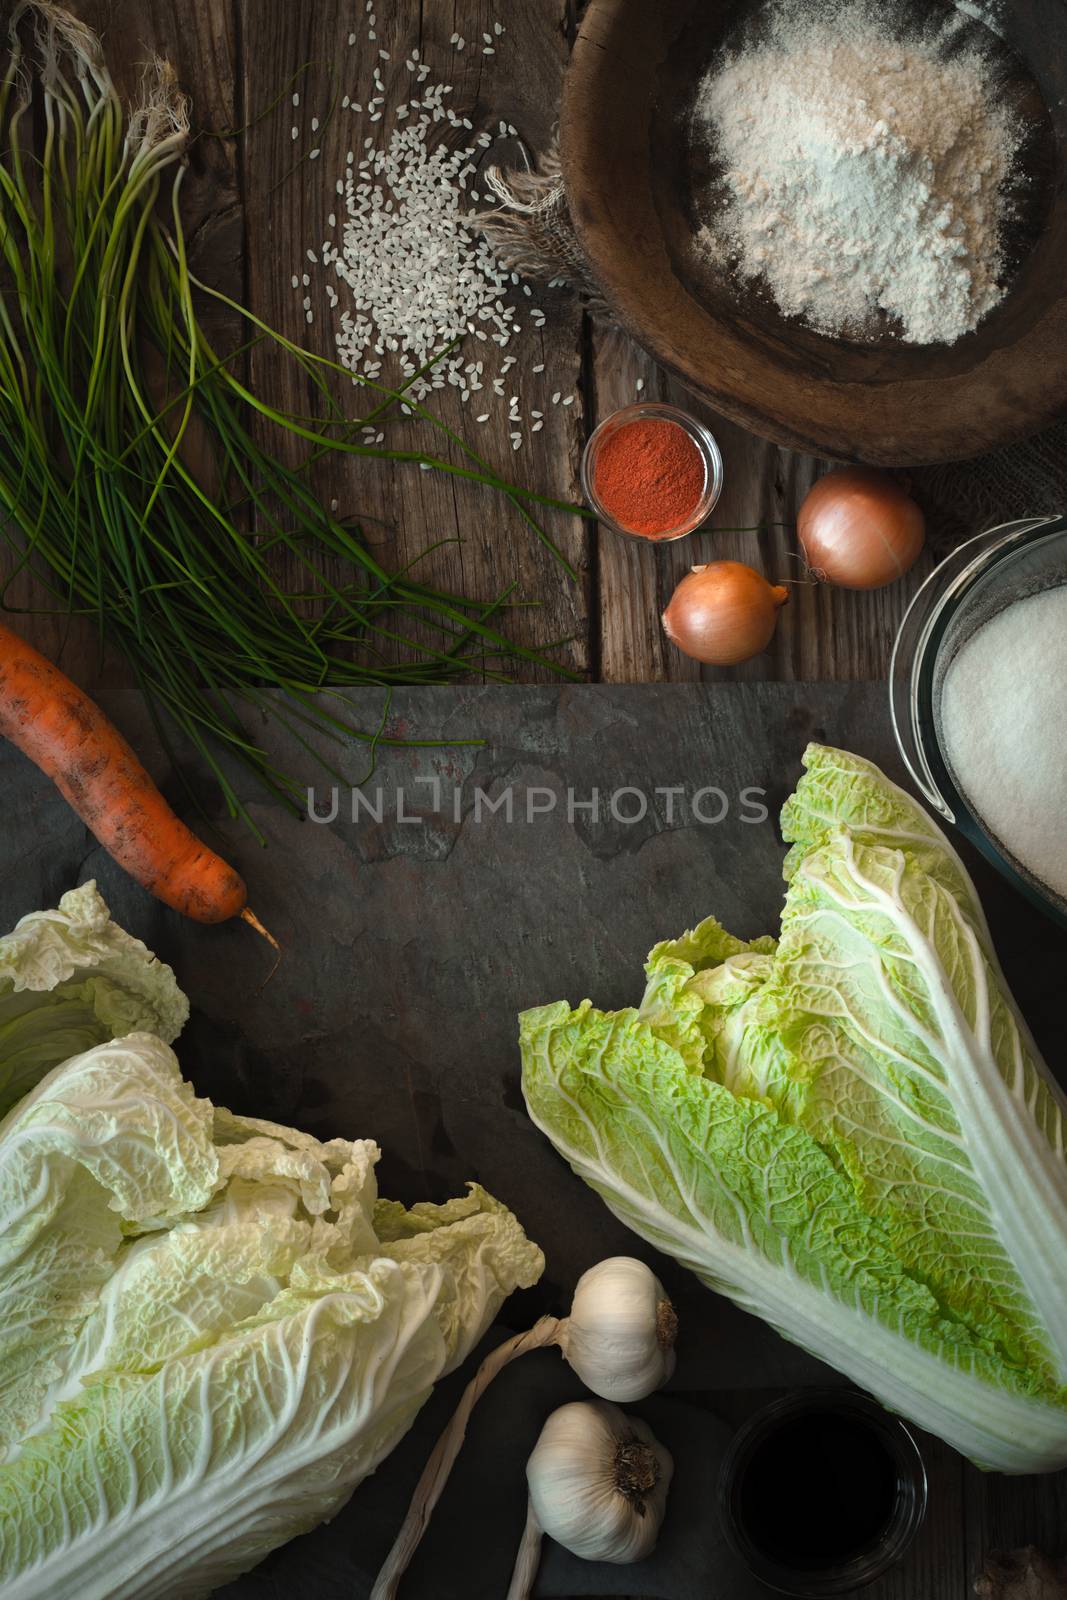 Frame of the ingredients for kimchi on the table vertical